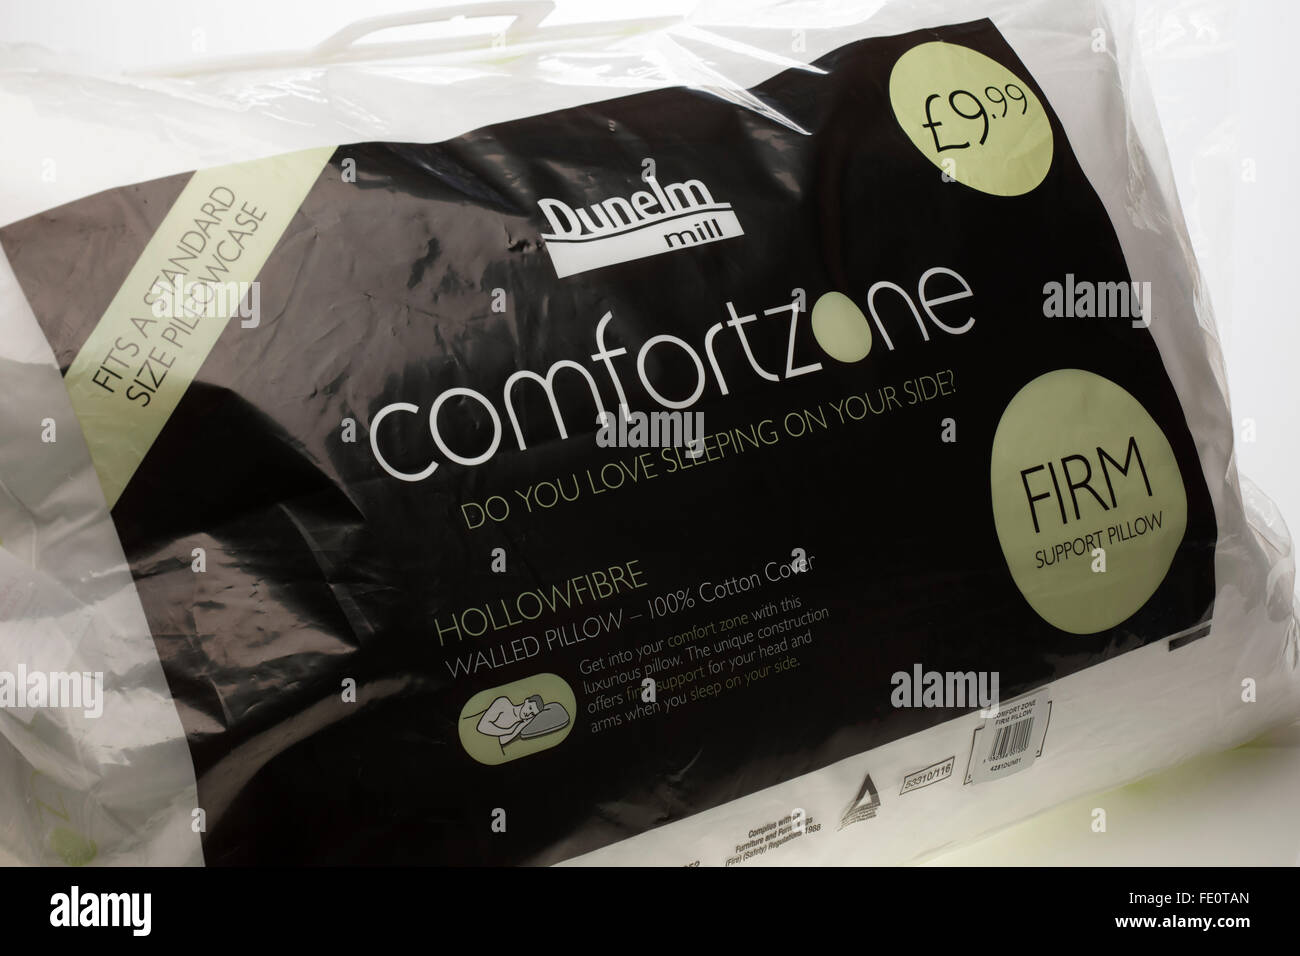 Dunelm Mill comfortzone hollowfibre firm walled support pillow price 9  pounds and 99 pence Stock Photo - Alamy